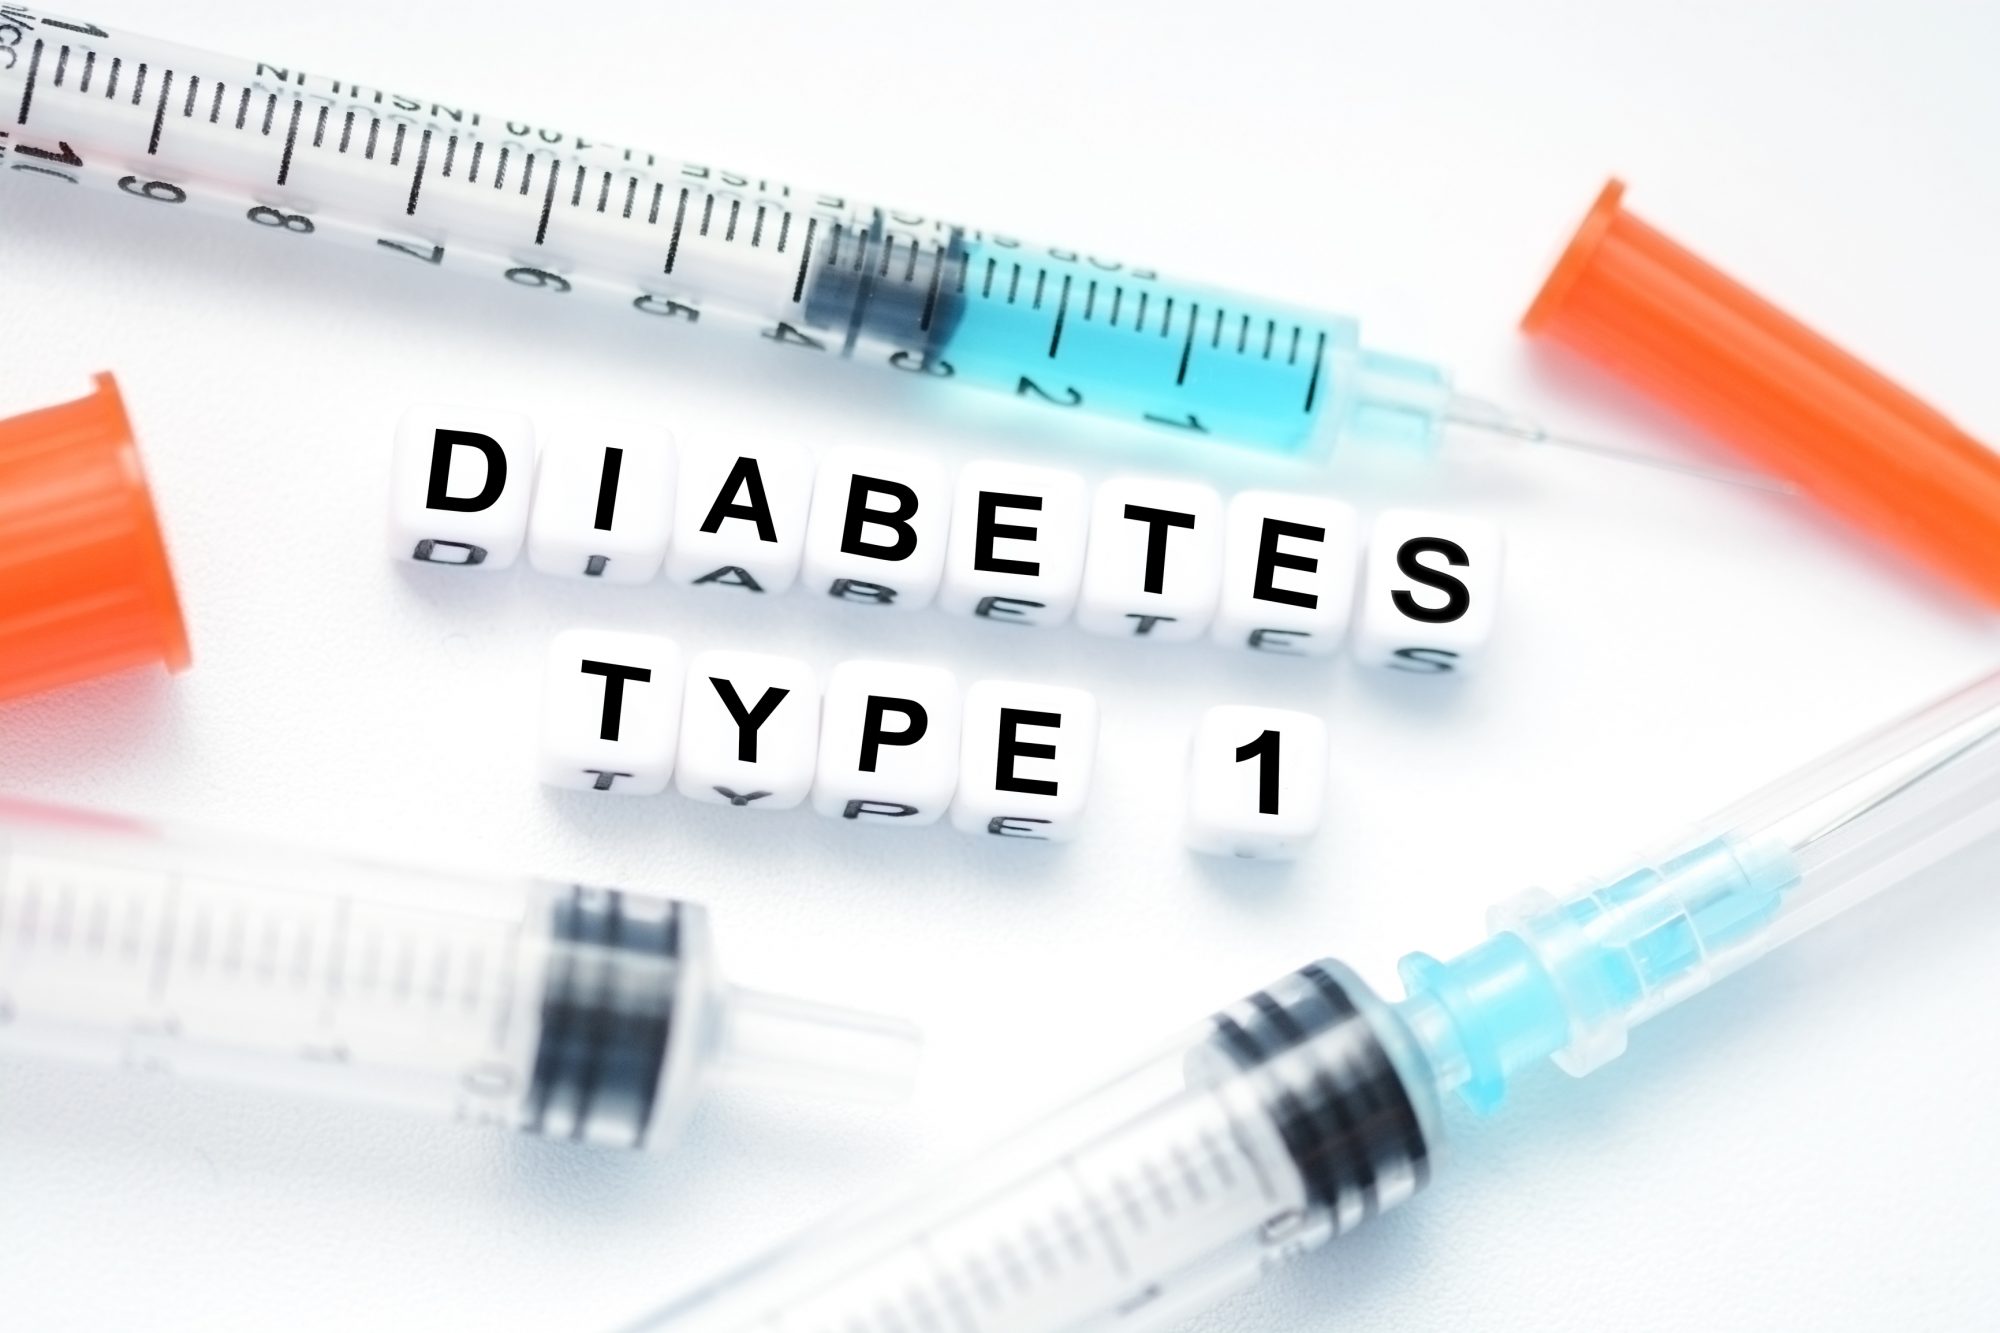 how close is a cure for type 1 diabetes 2021